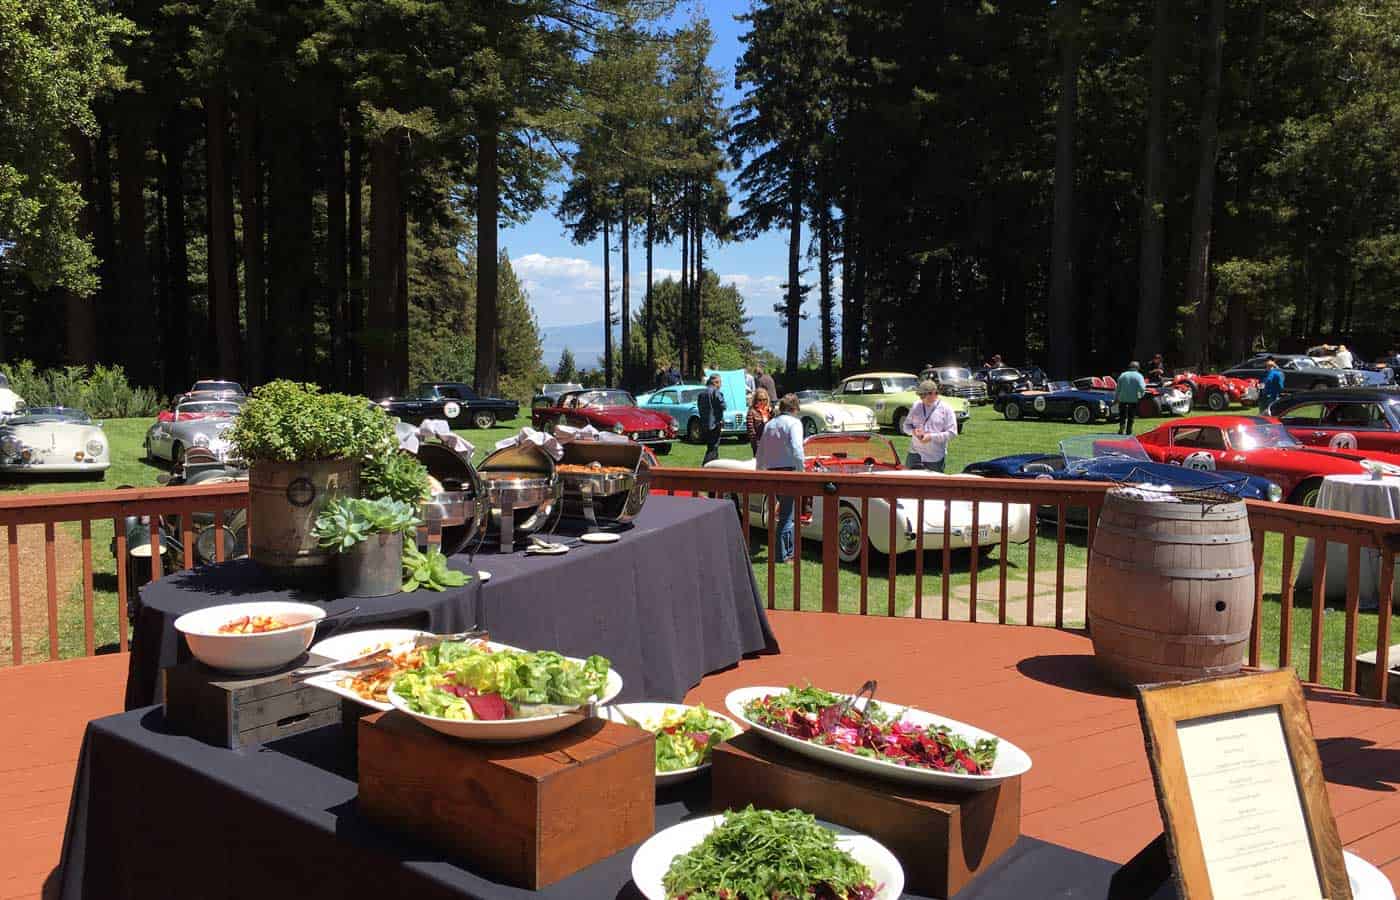 Buffet table on patio deck for classic car show on lawn